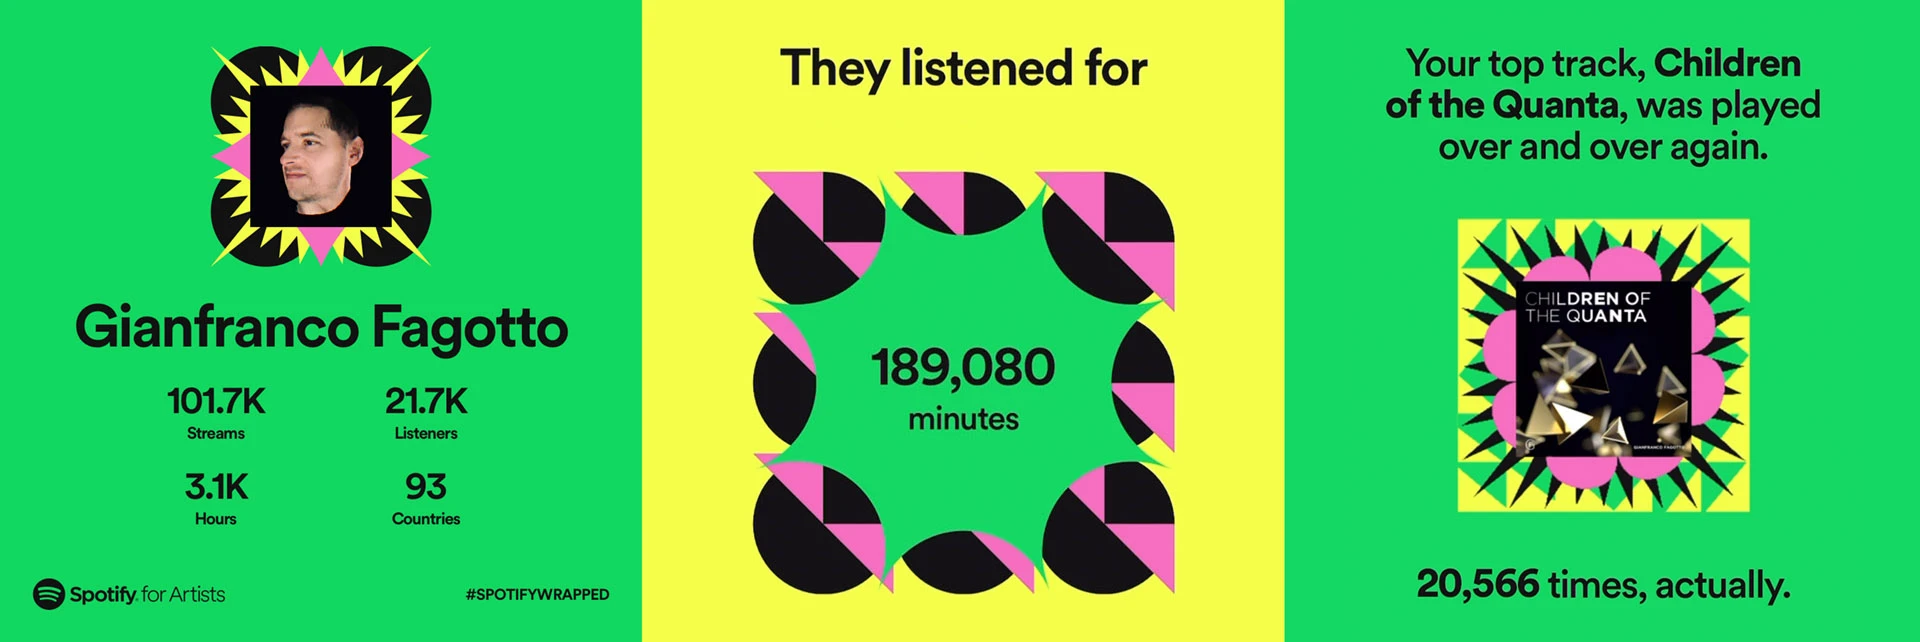 2022 Spotify Wrapped highlights